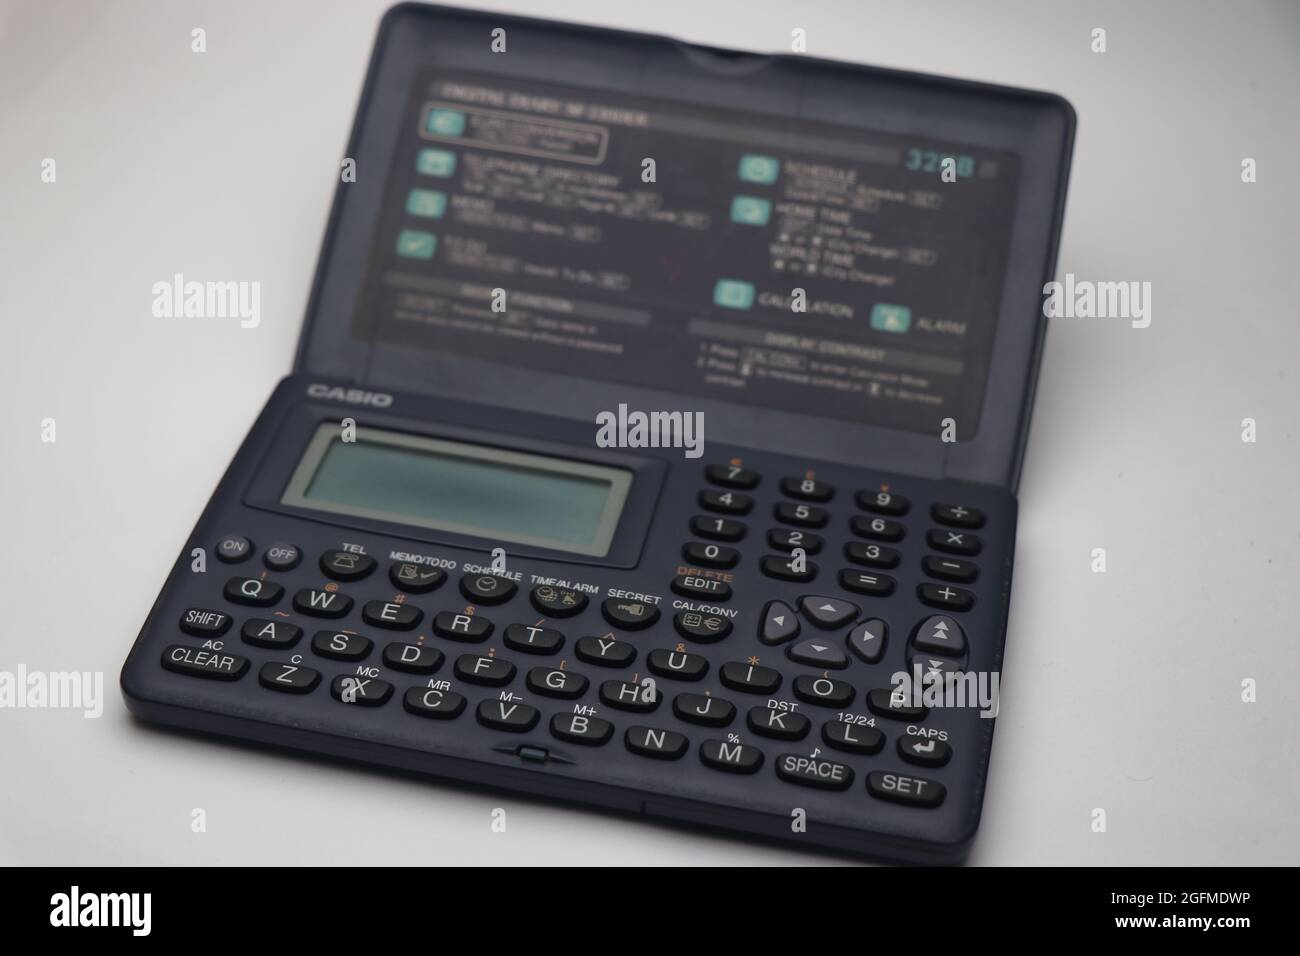 Casio made a digital diary to store notes and phone numbers. Vintage Computers from Casio Stock Photo